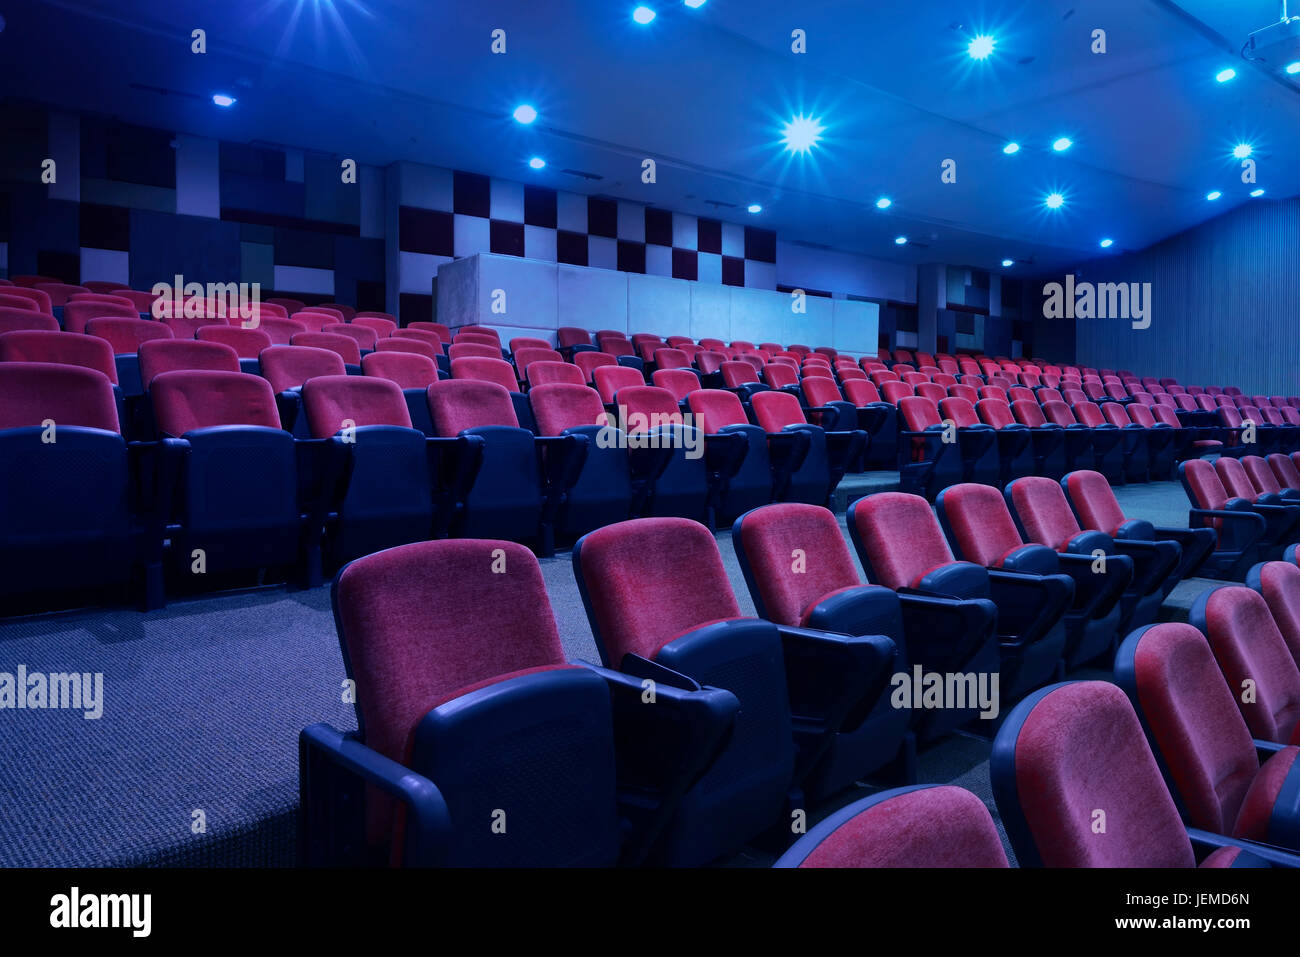 Bright blue light with black armchairs in movie theater Stock Photo